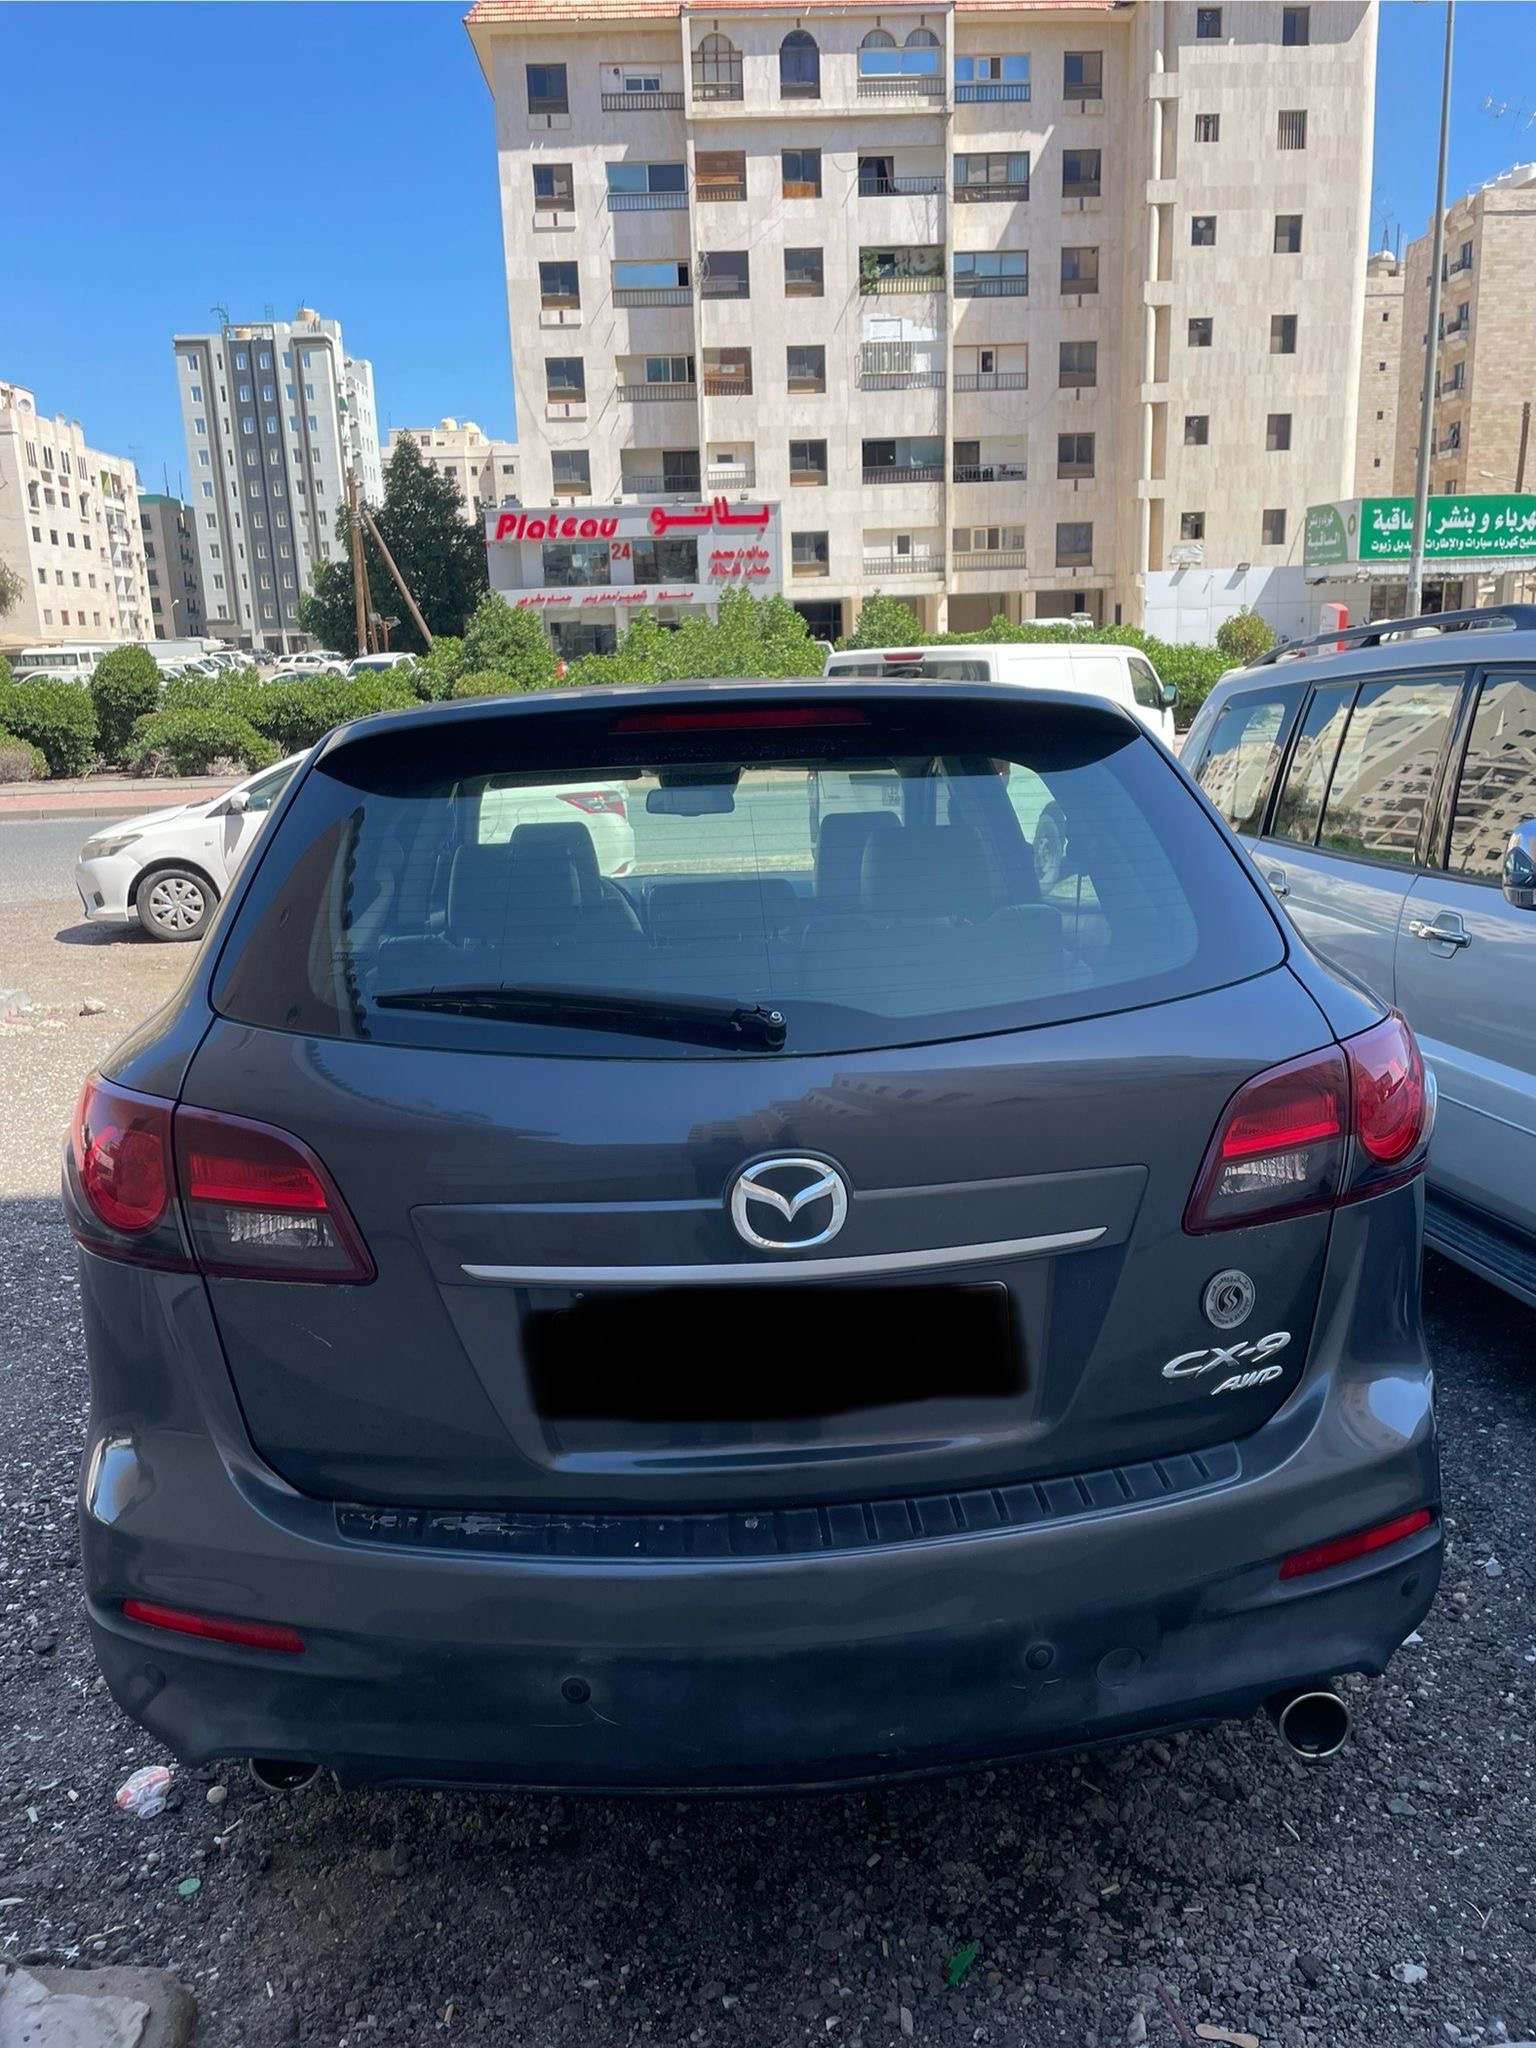 URGENT SALE..! Mazda CX 9 2015 model year. 160kms only. Full option. Family used car